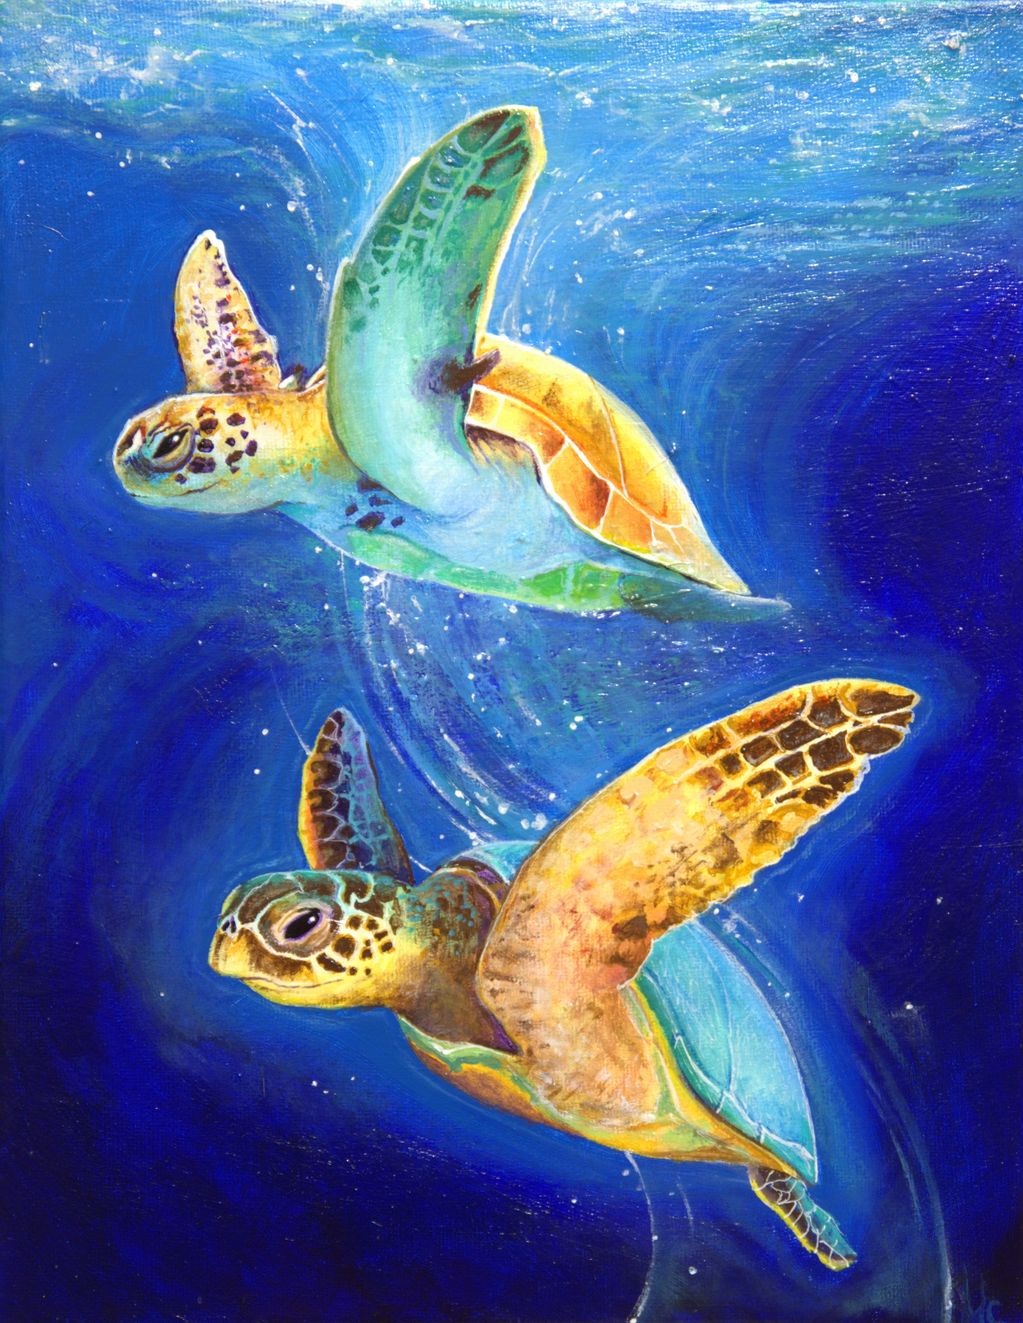 two sea turtles frolicking underwater with stars